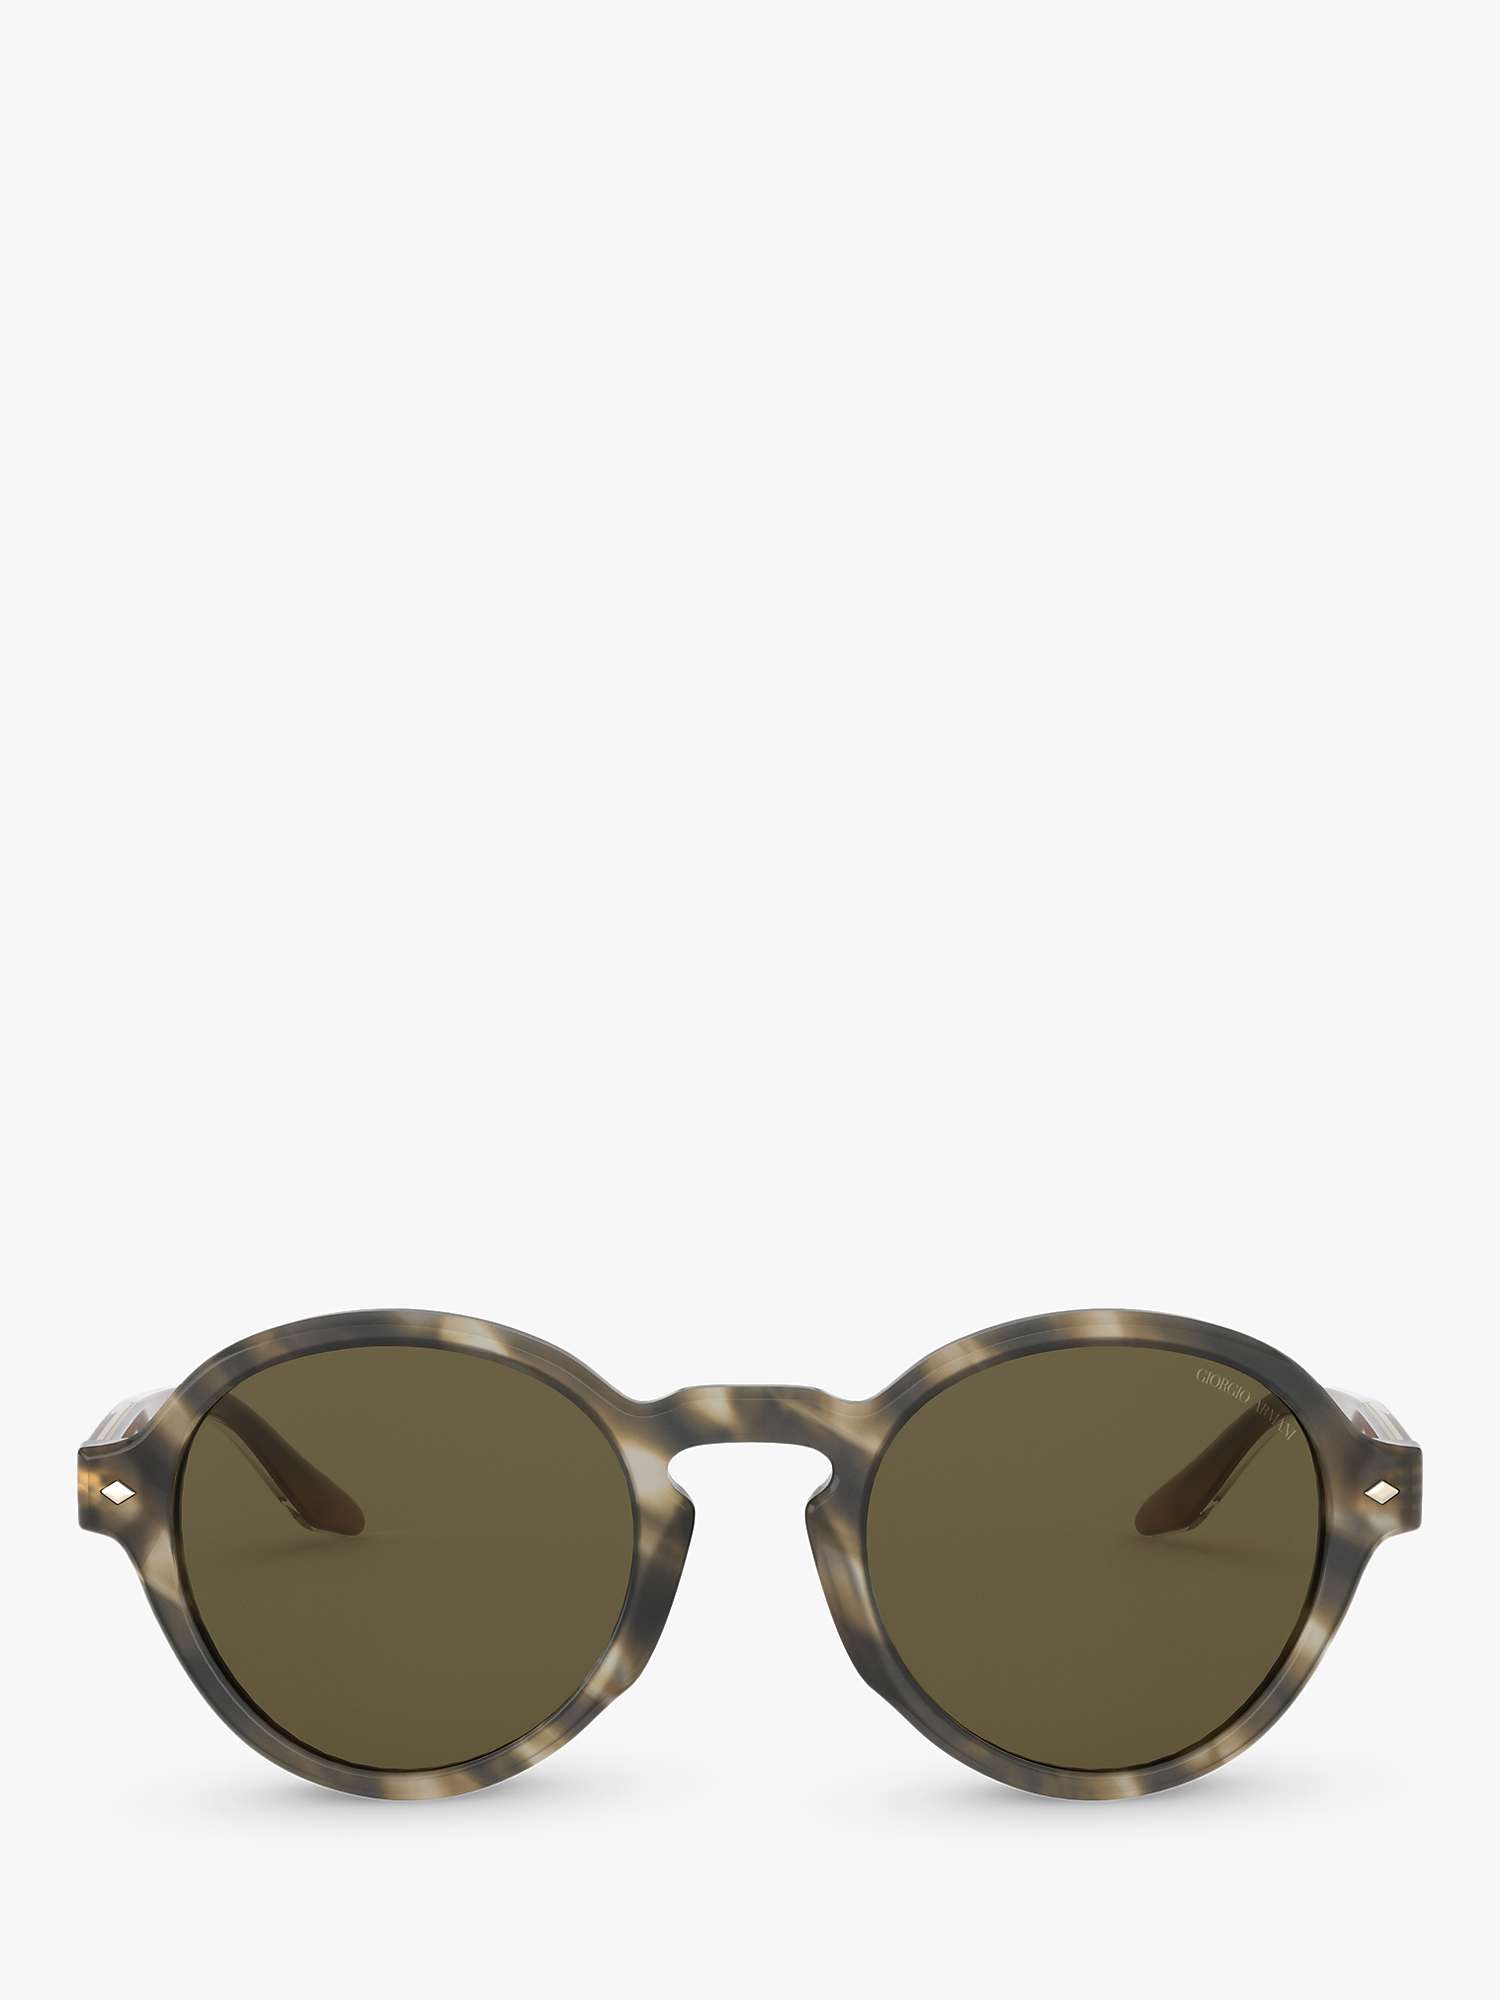 Buy Emporio Armani AR8130 Men's Oval Sunglasses, Striped Brown/Brown Online at johnlewis.com